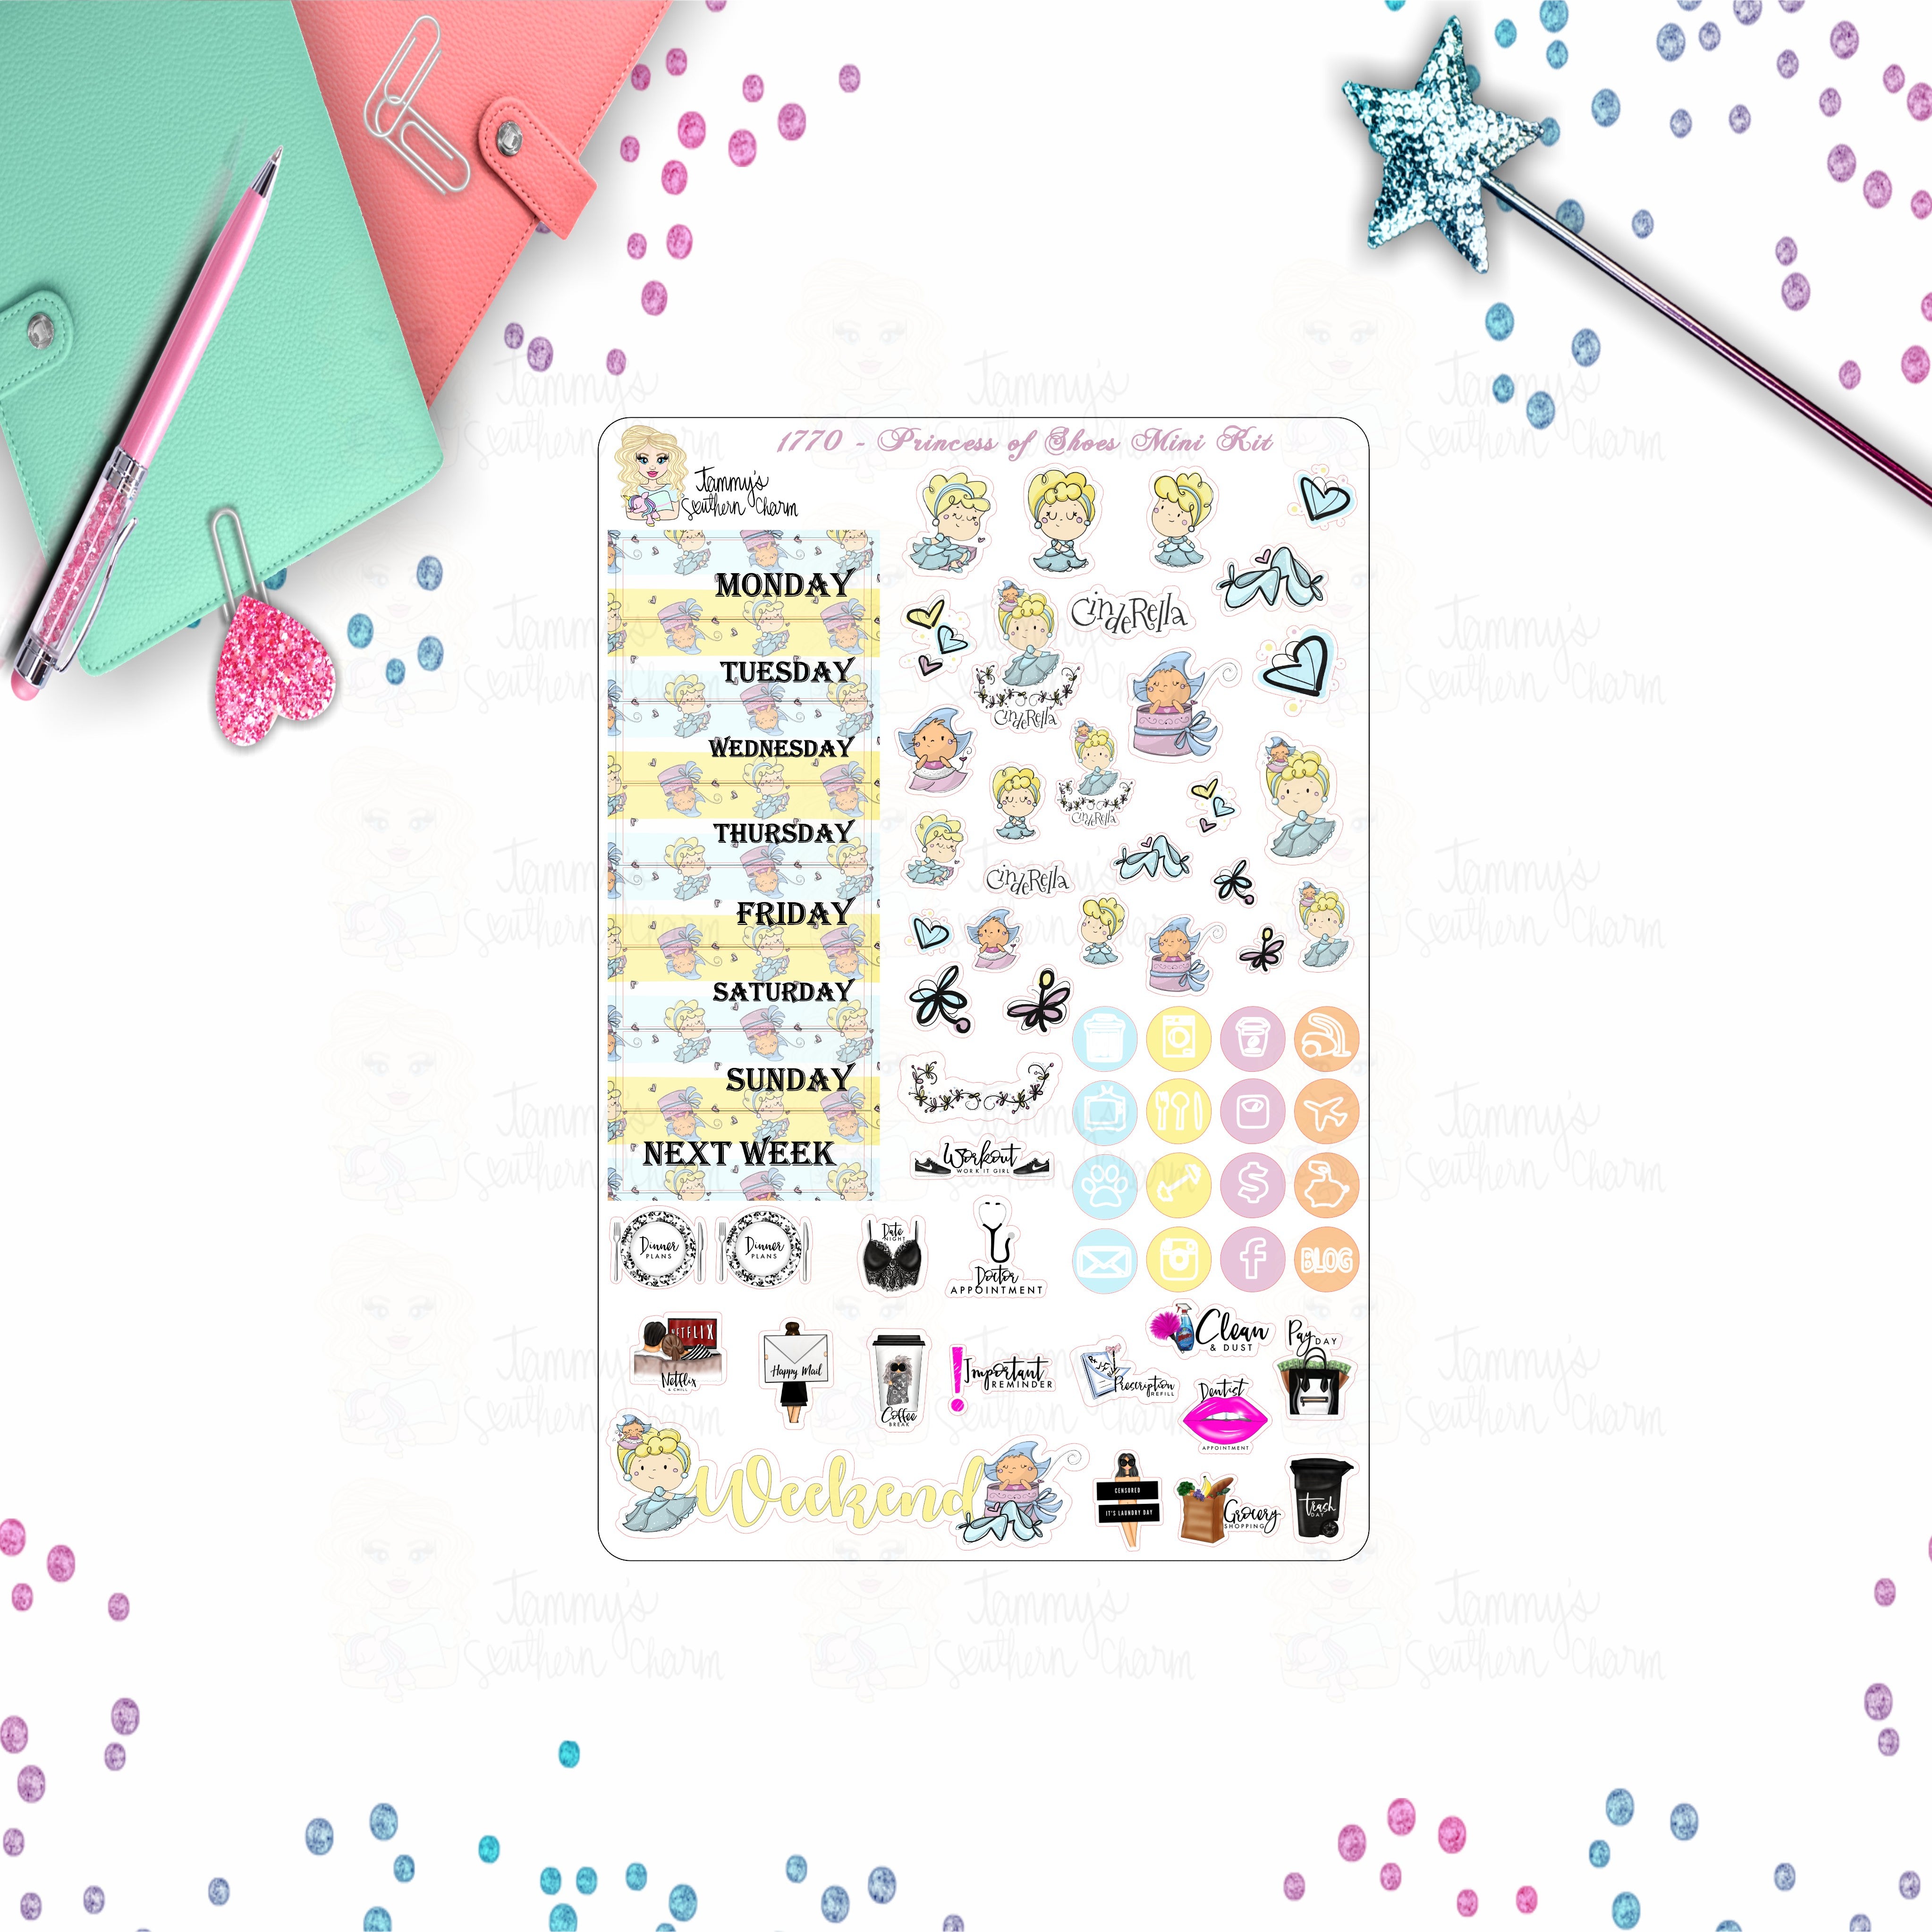 1770 PRINCESS OF SHOES - Stickers, Planner Stickers, Traveler's nb stickers, Planner Layout, cinderella inspired